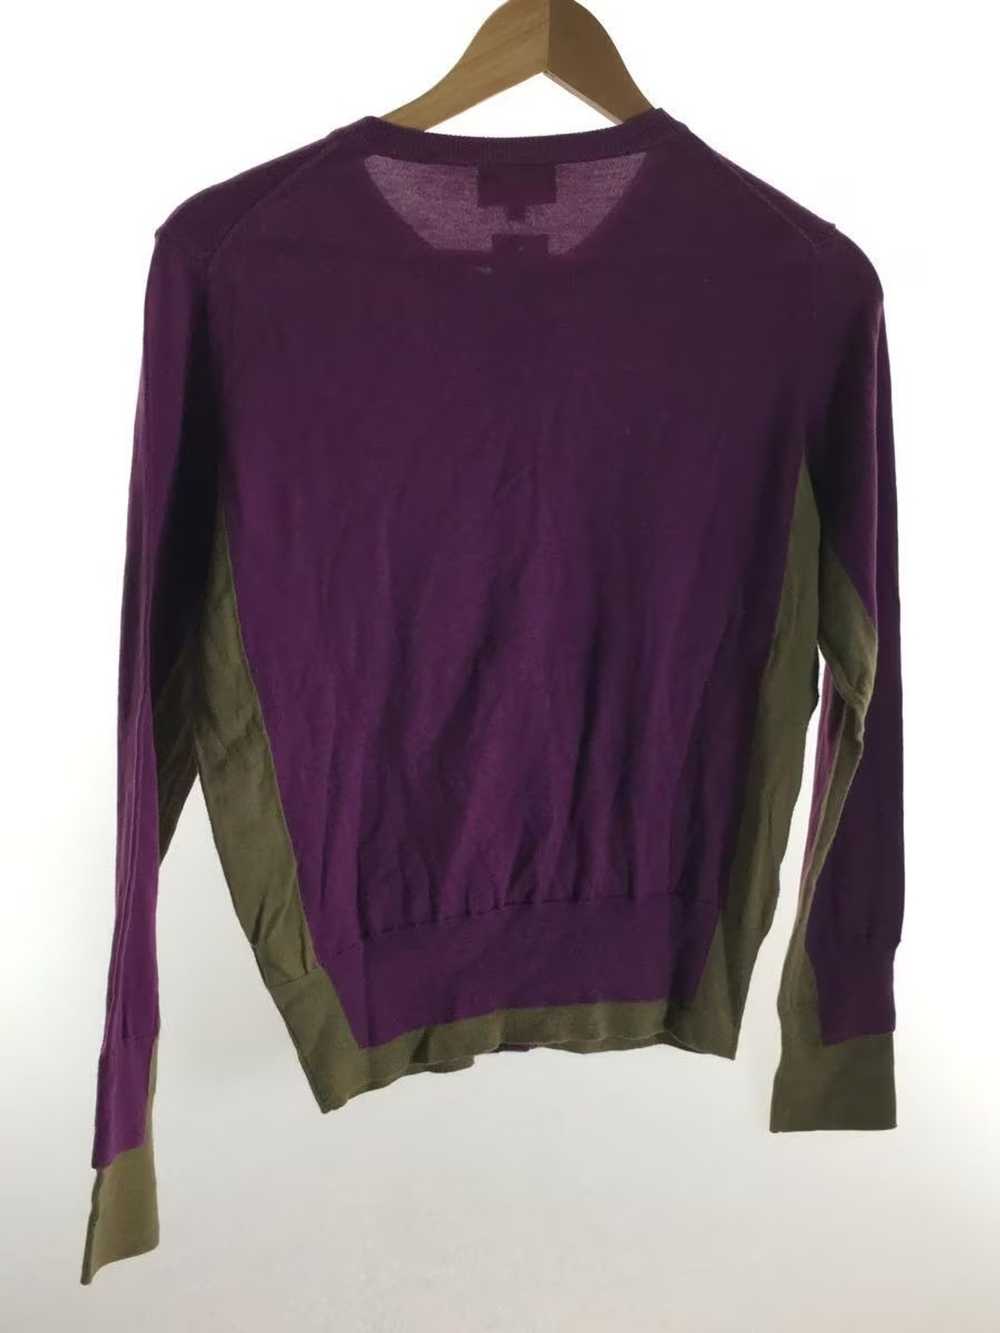 Vivienne Westwood Reconstructed Orb Knit Cardigan - image 2